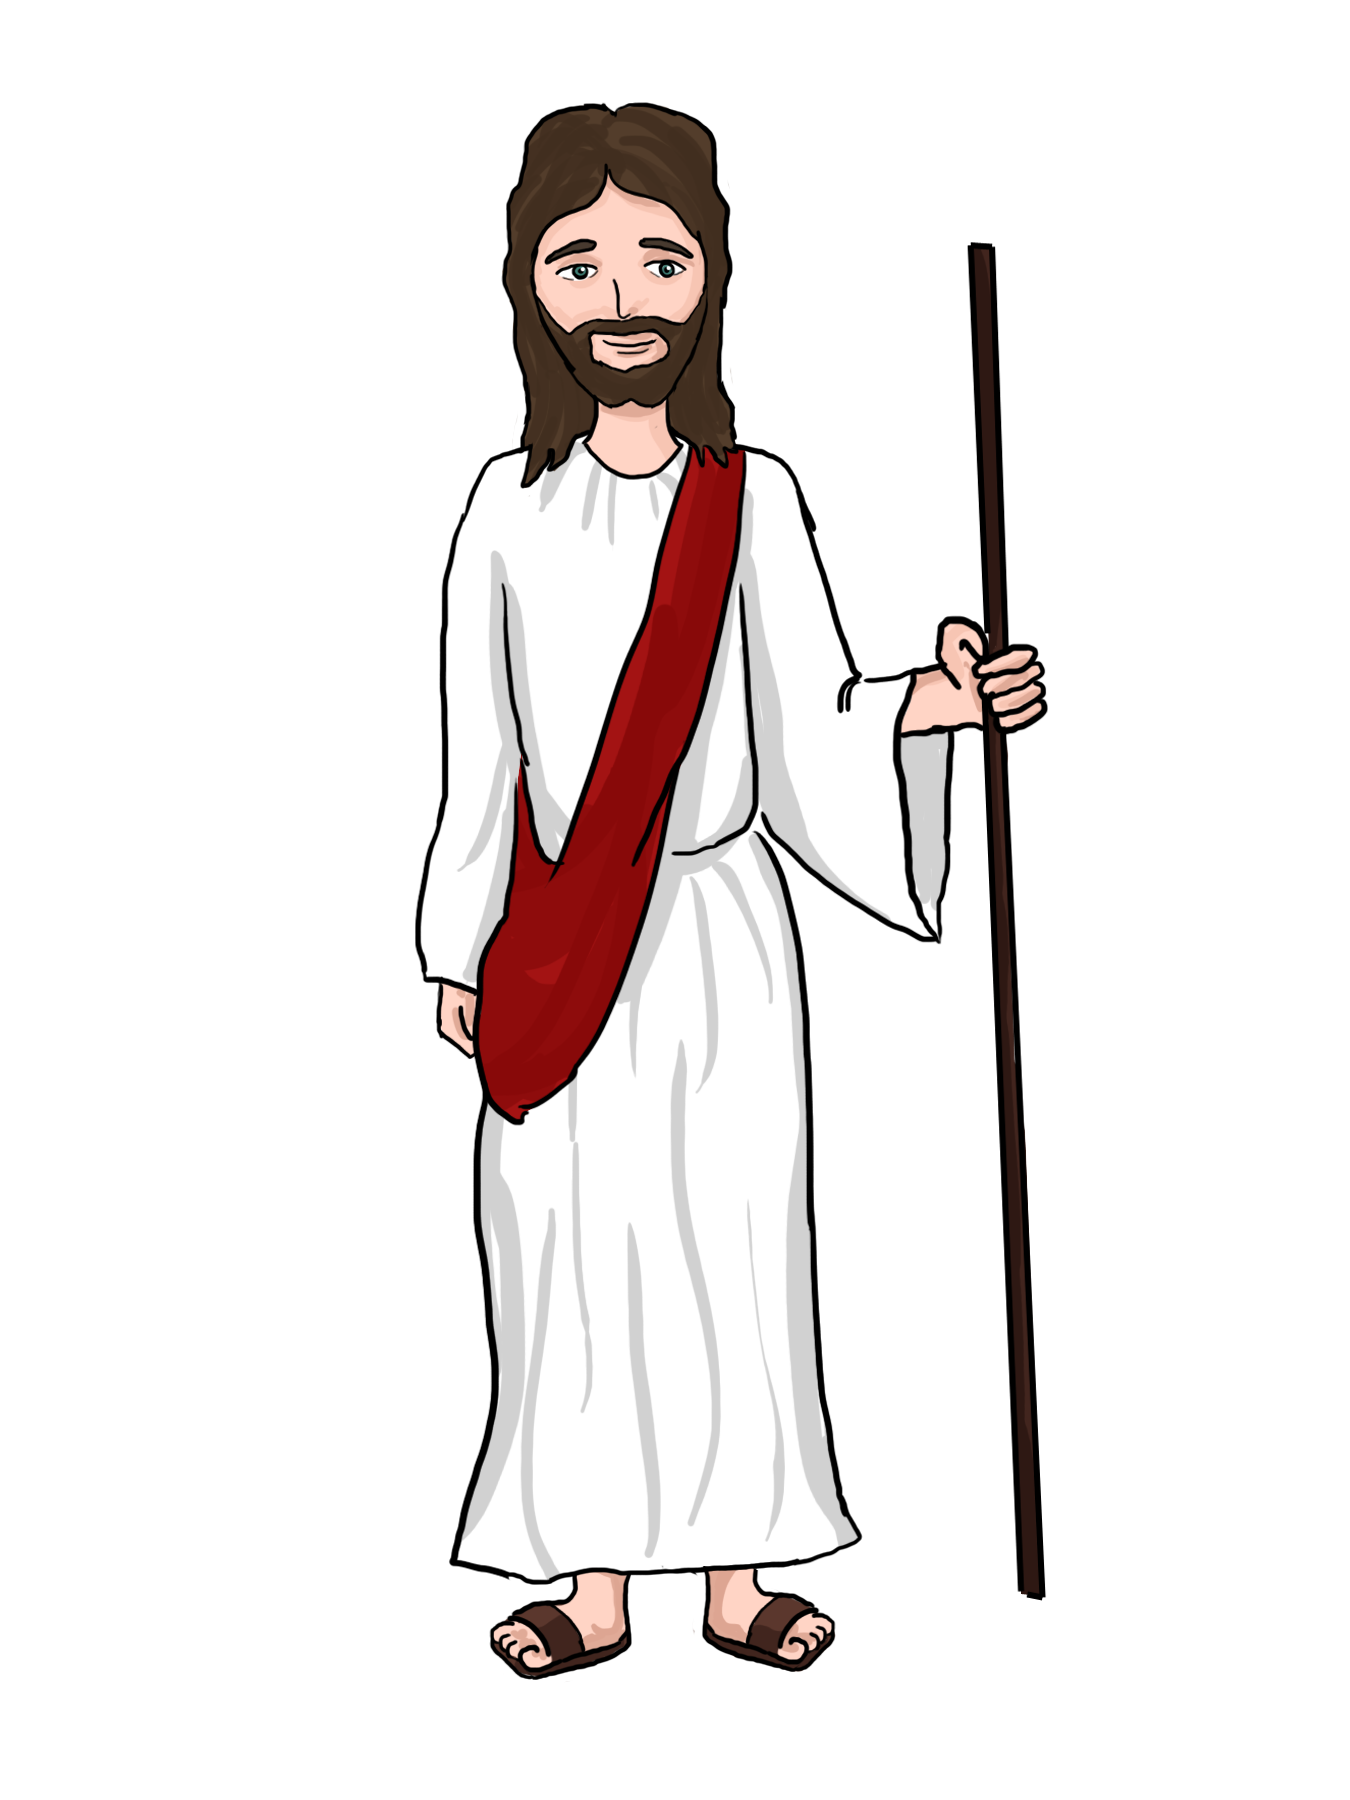 Do You Need A Jesus Christ Clip Art For Your Lent Or Easter Project